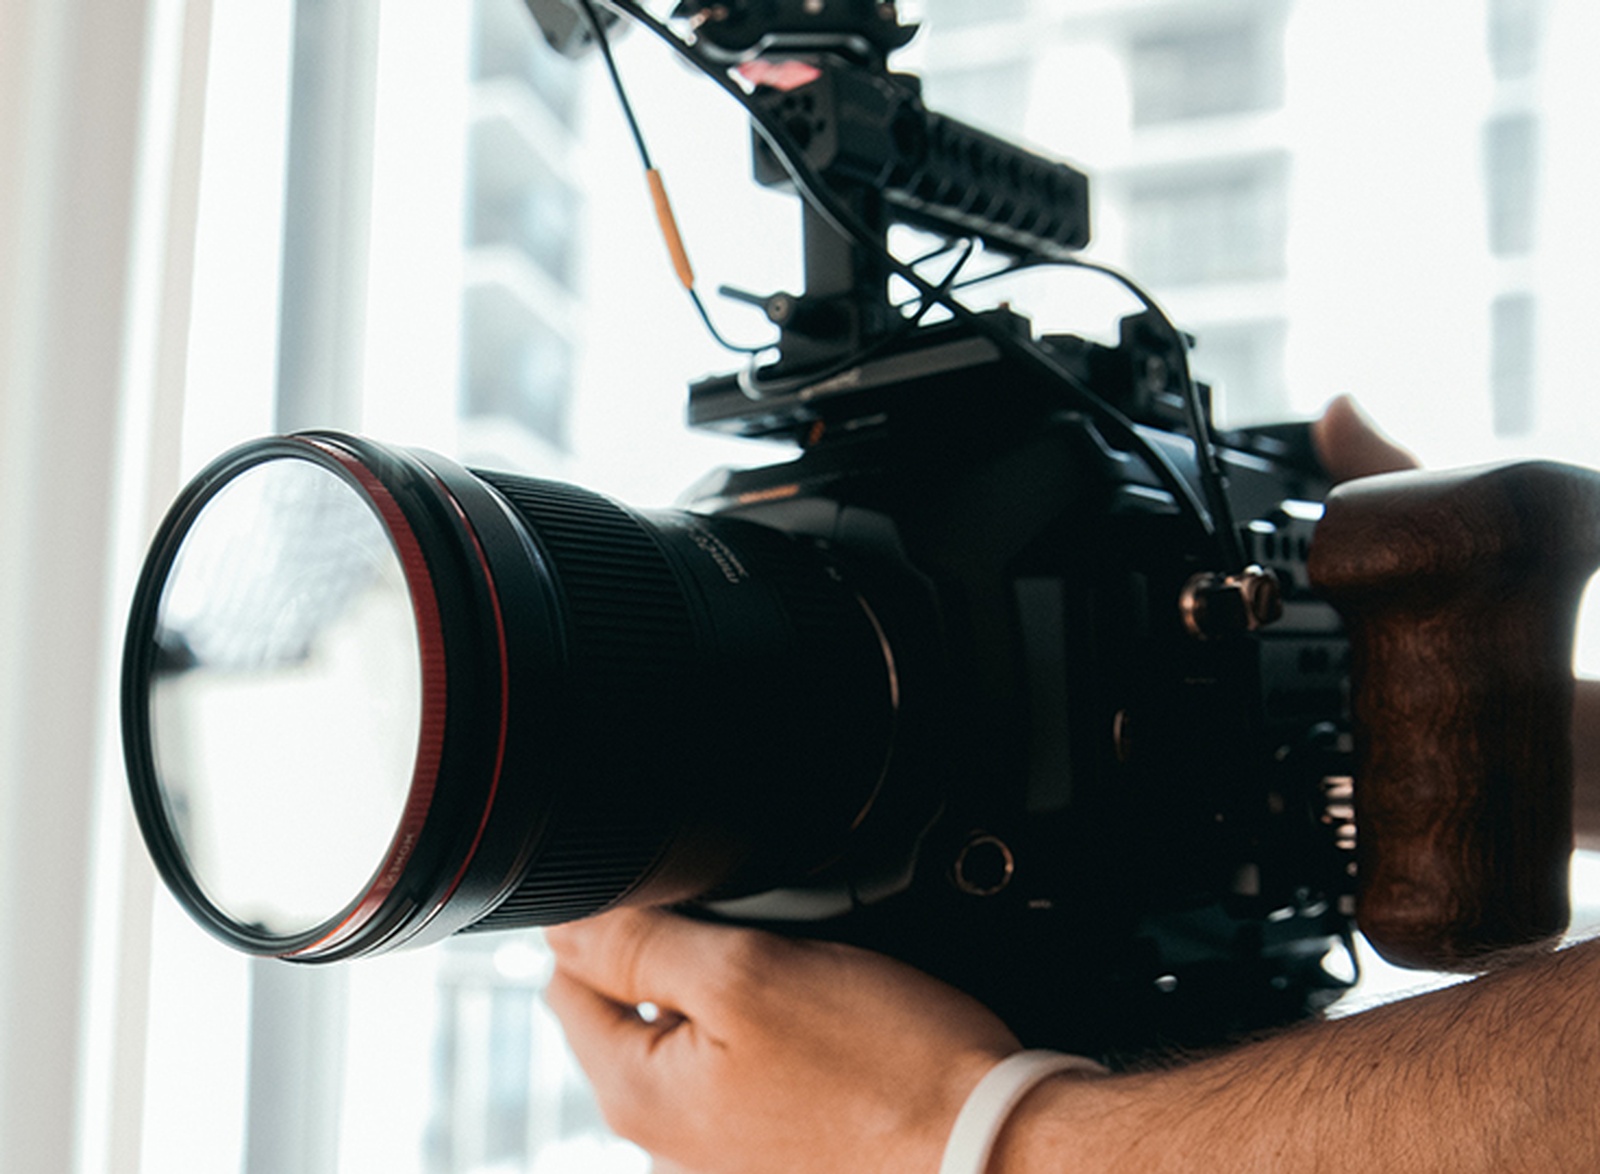 Corporate Video Production & Video Marketing for Businesses in Chicago, Illinois